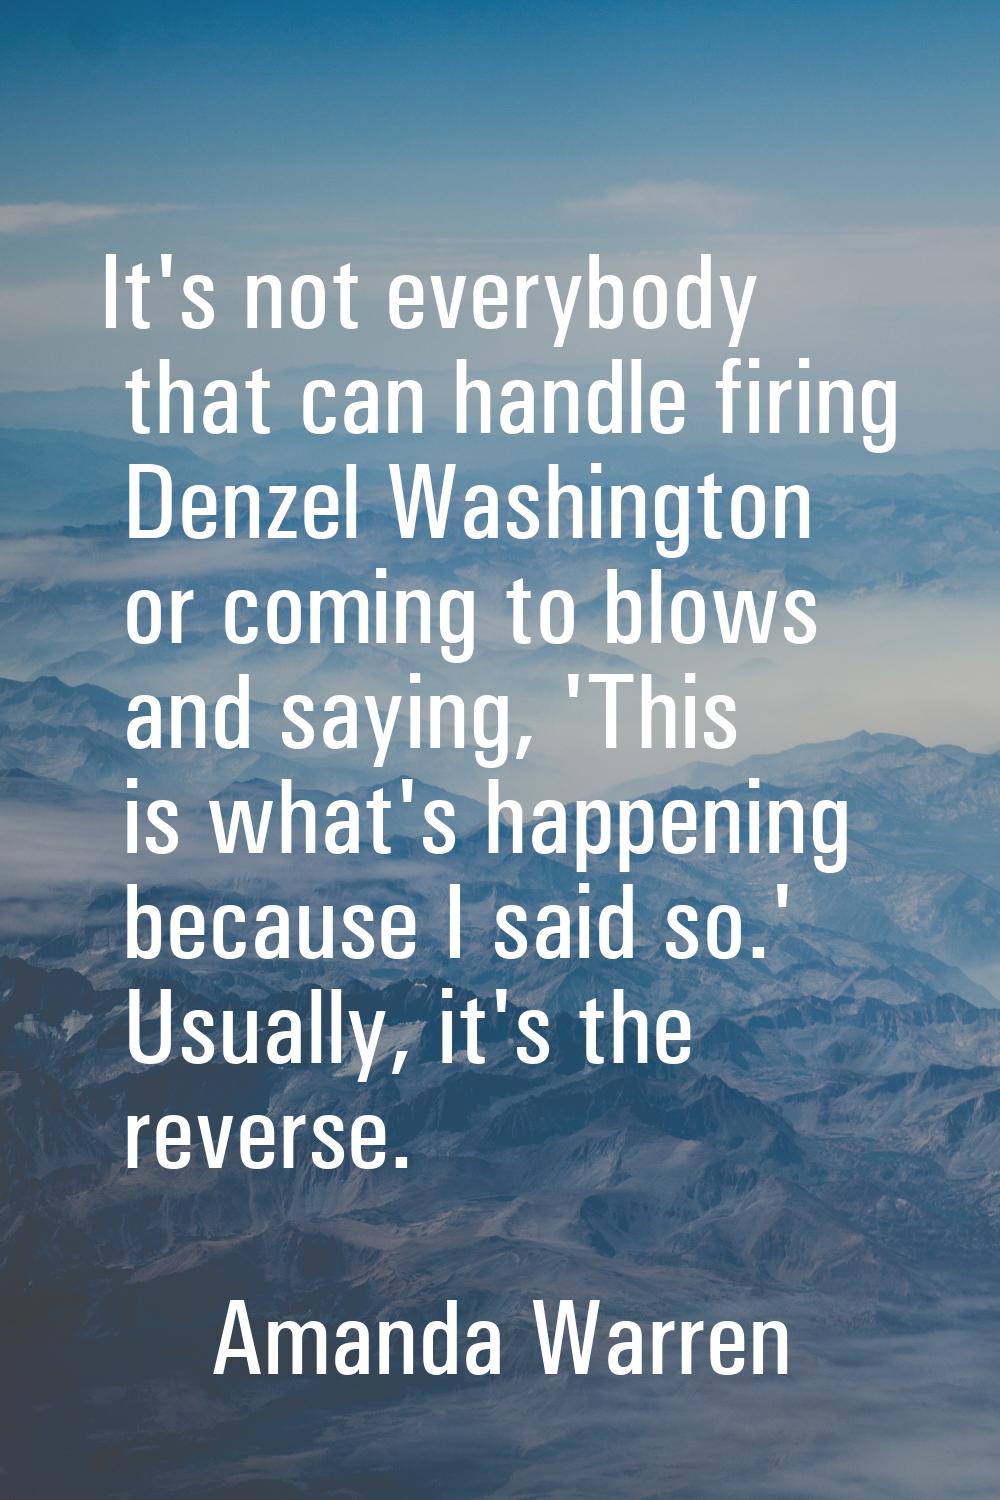 It's not everybody that can handle firing Denzel Washington or coming to blows and saying, 'This is